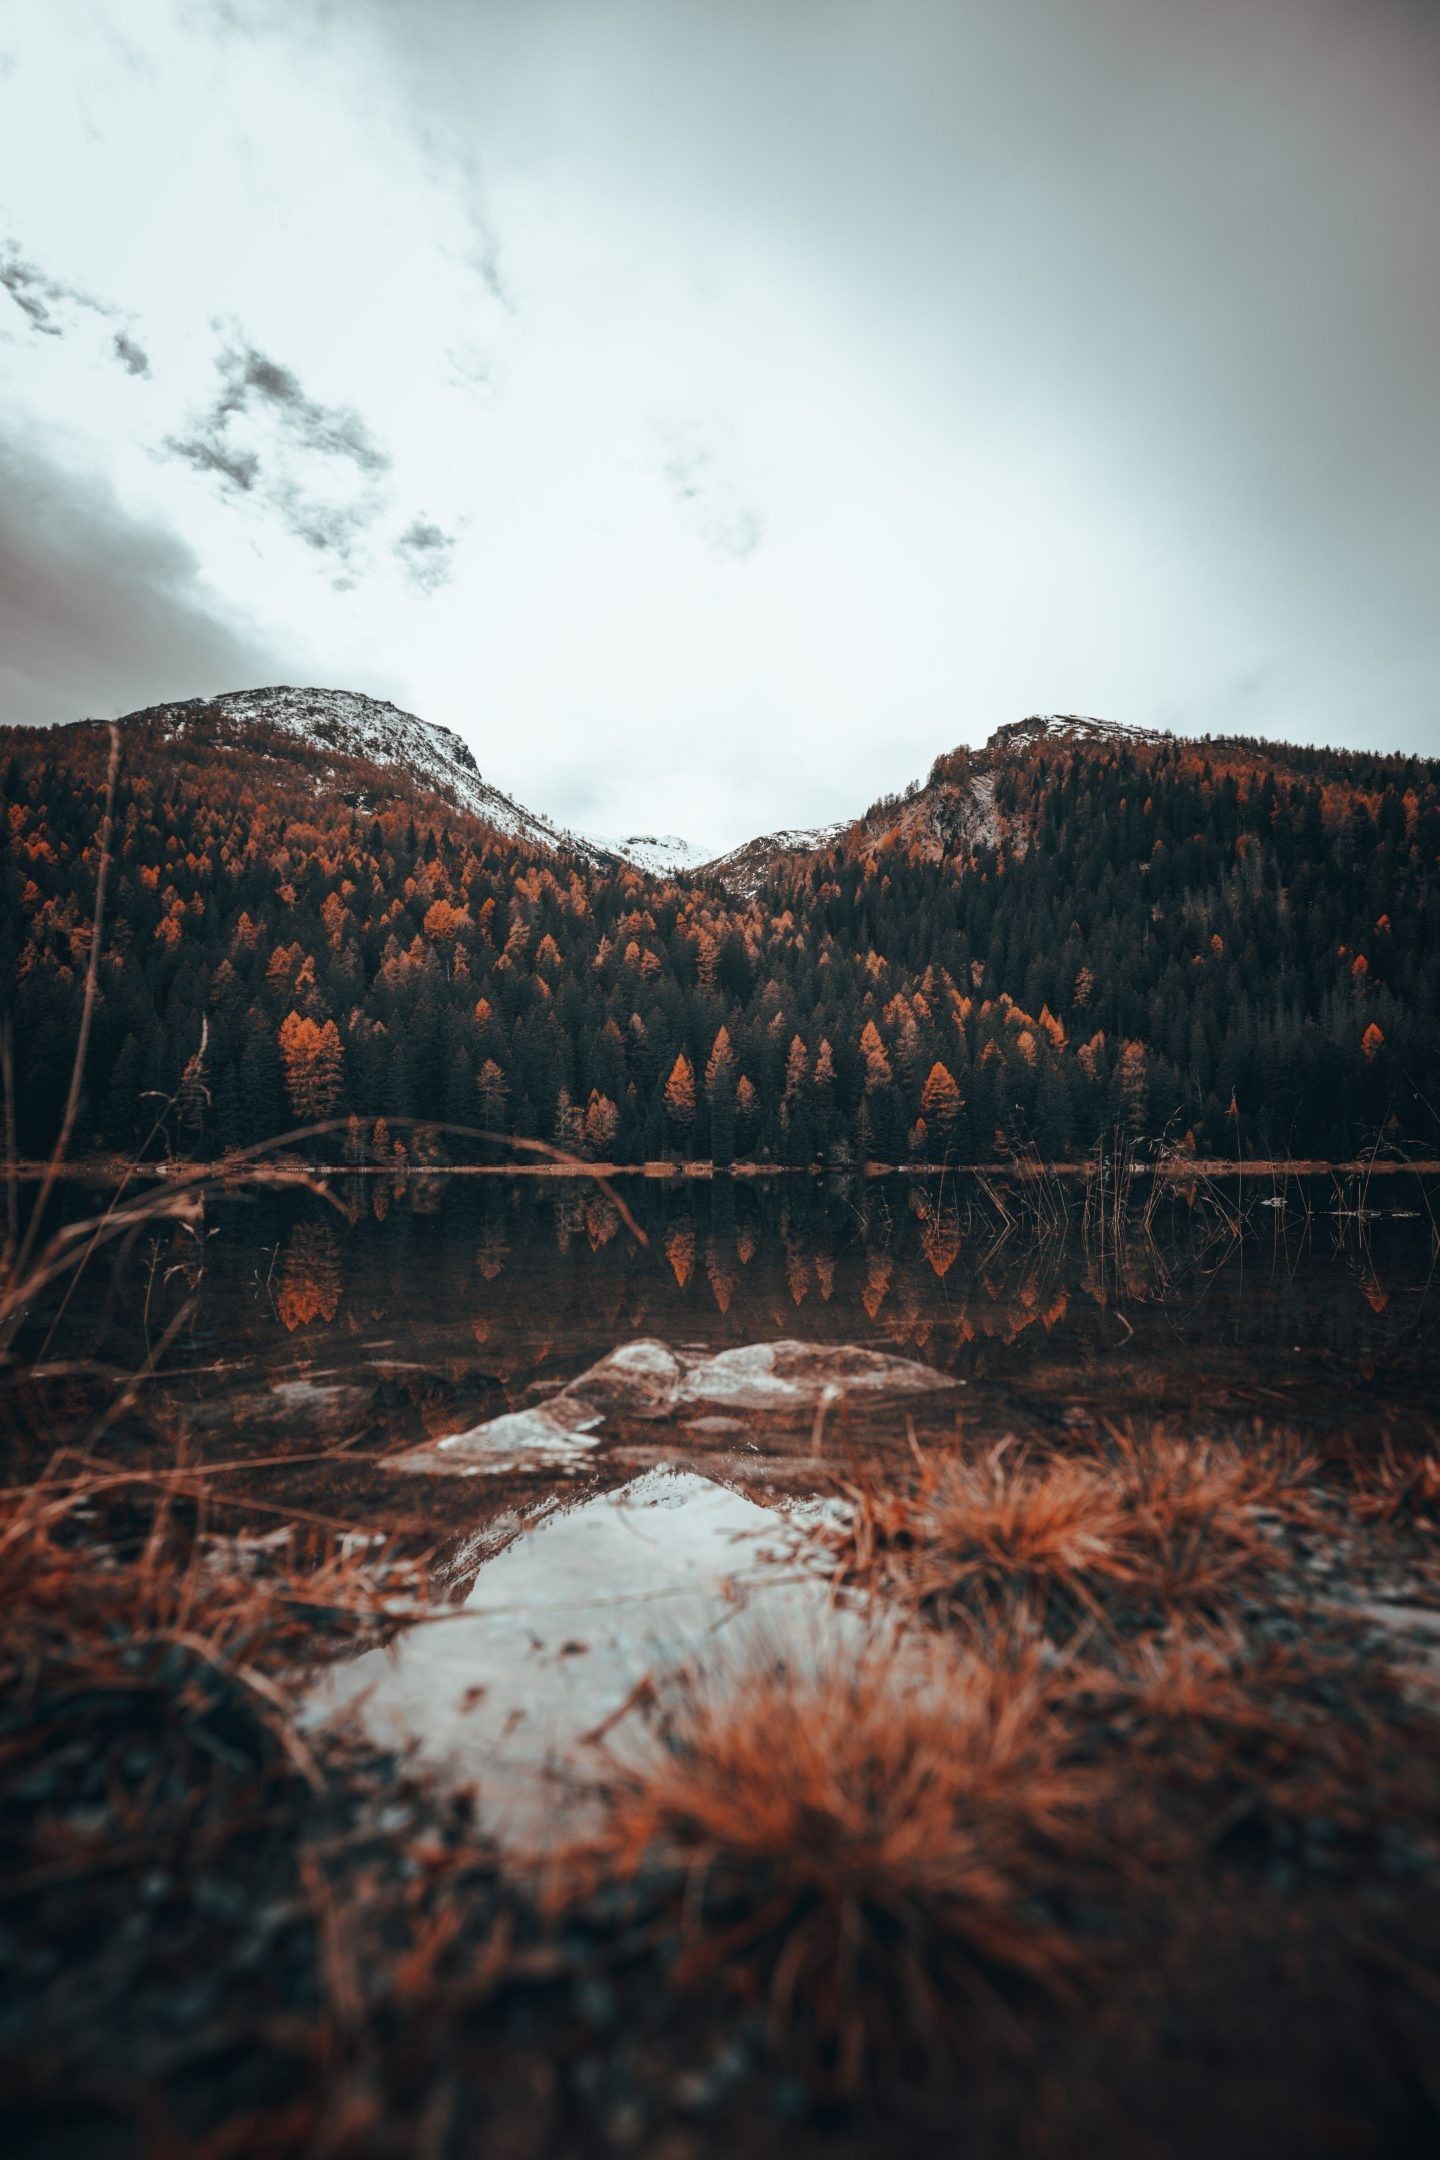 A lake in the mountains with a cloudy sky - Fall, cute fall, lake